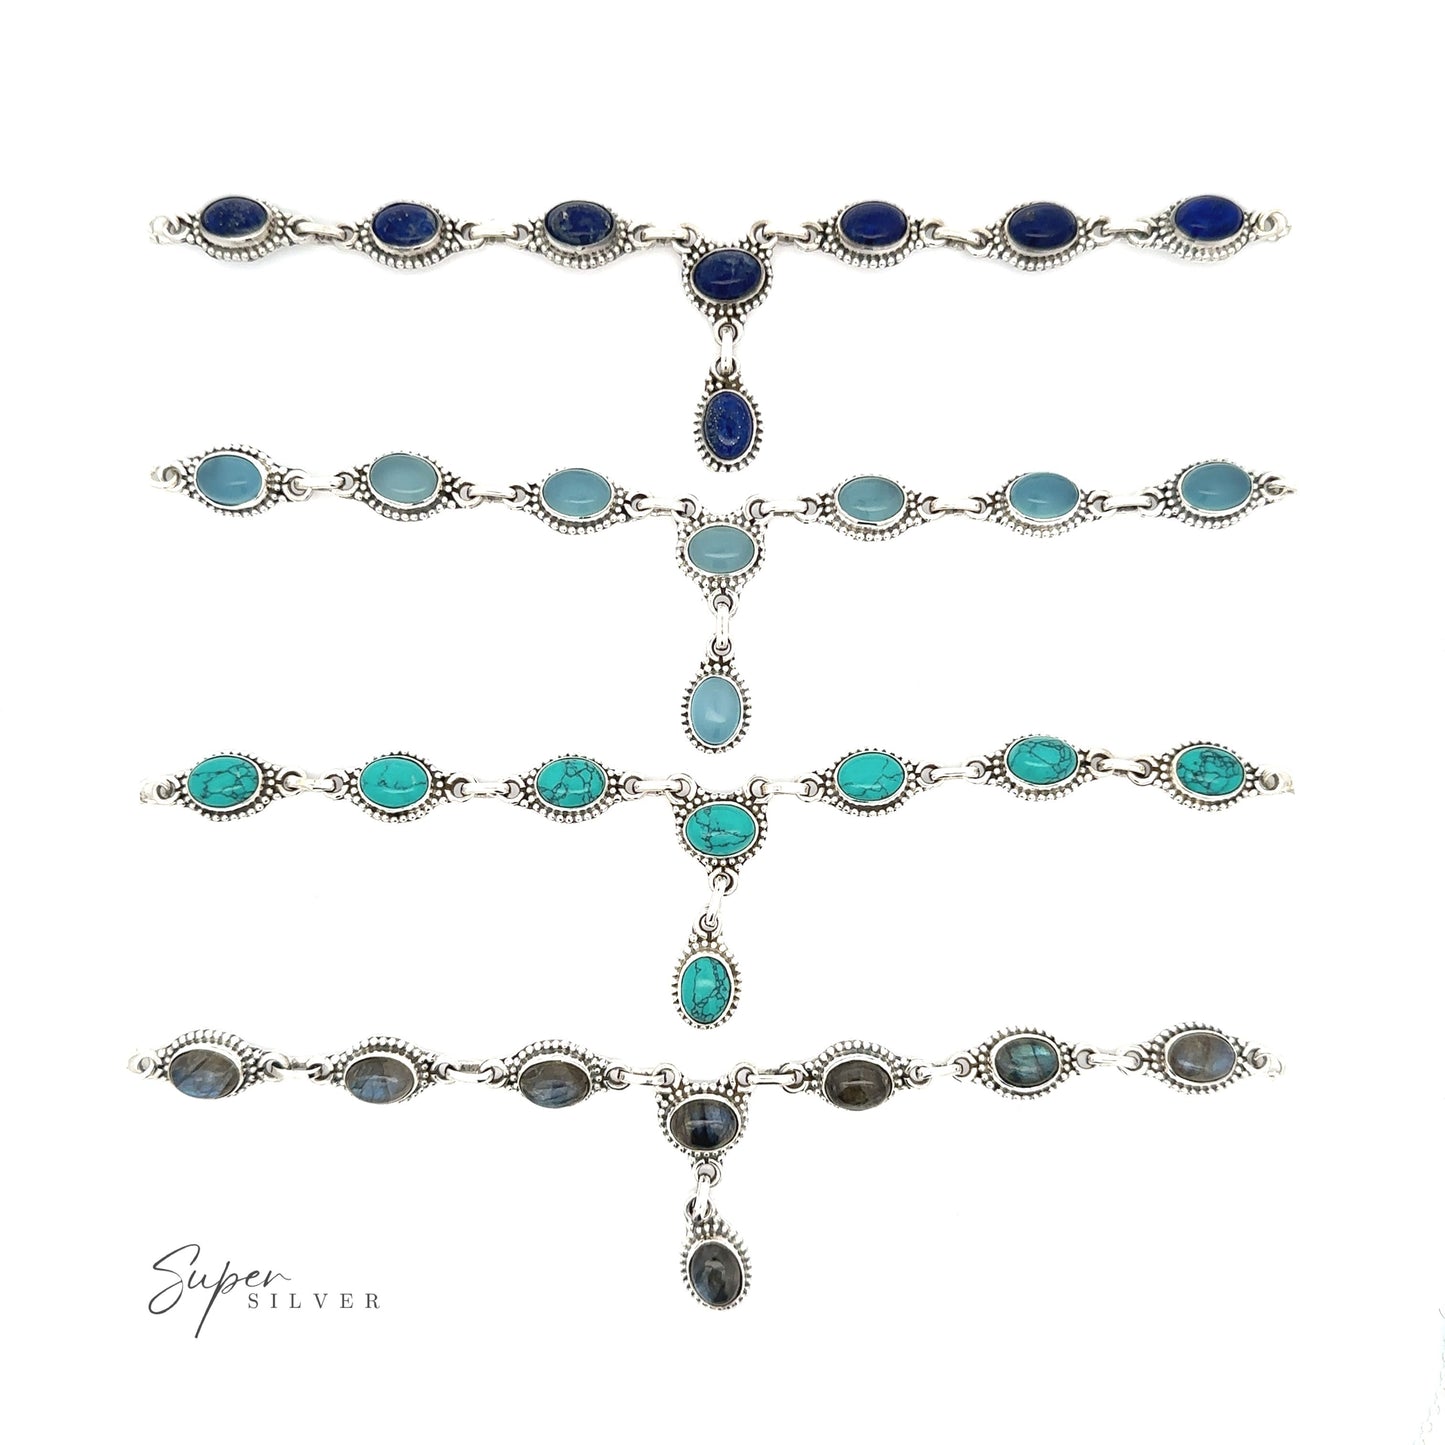 
                  
                    A set of Gemstone Y-Necklaces with Beaded Border, featuring blue and turquoise stones, and a delicate chain. Each necklace has a single gemstone drop pendant in various options.
                  
                